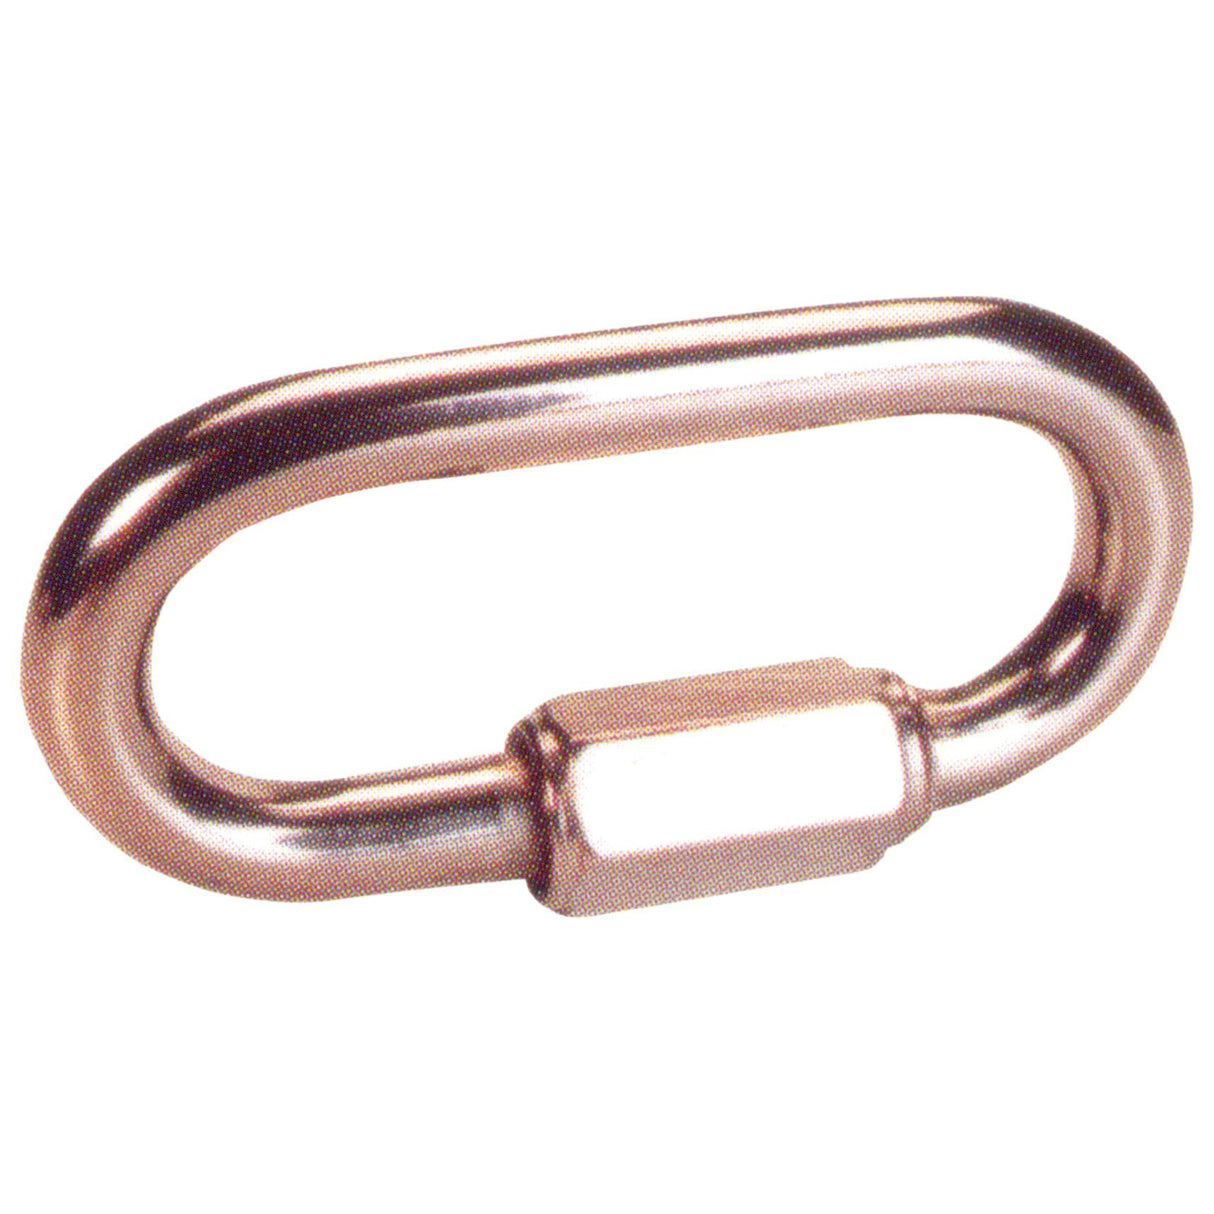 Stainless Steel Chain Quick Link⌀6mm
 - S.21615 - Farming Parts